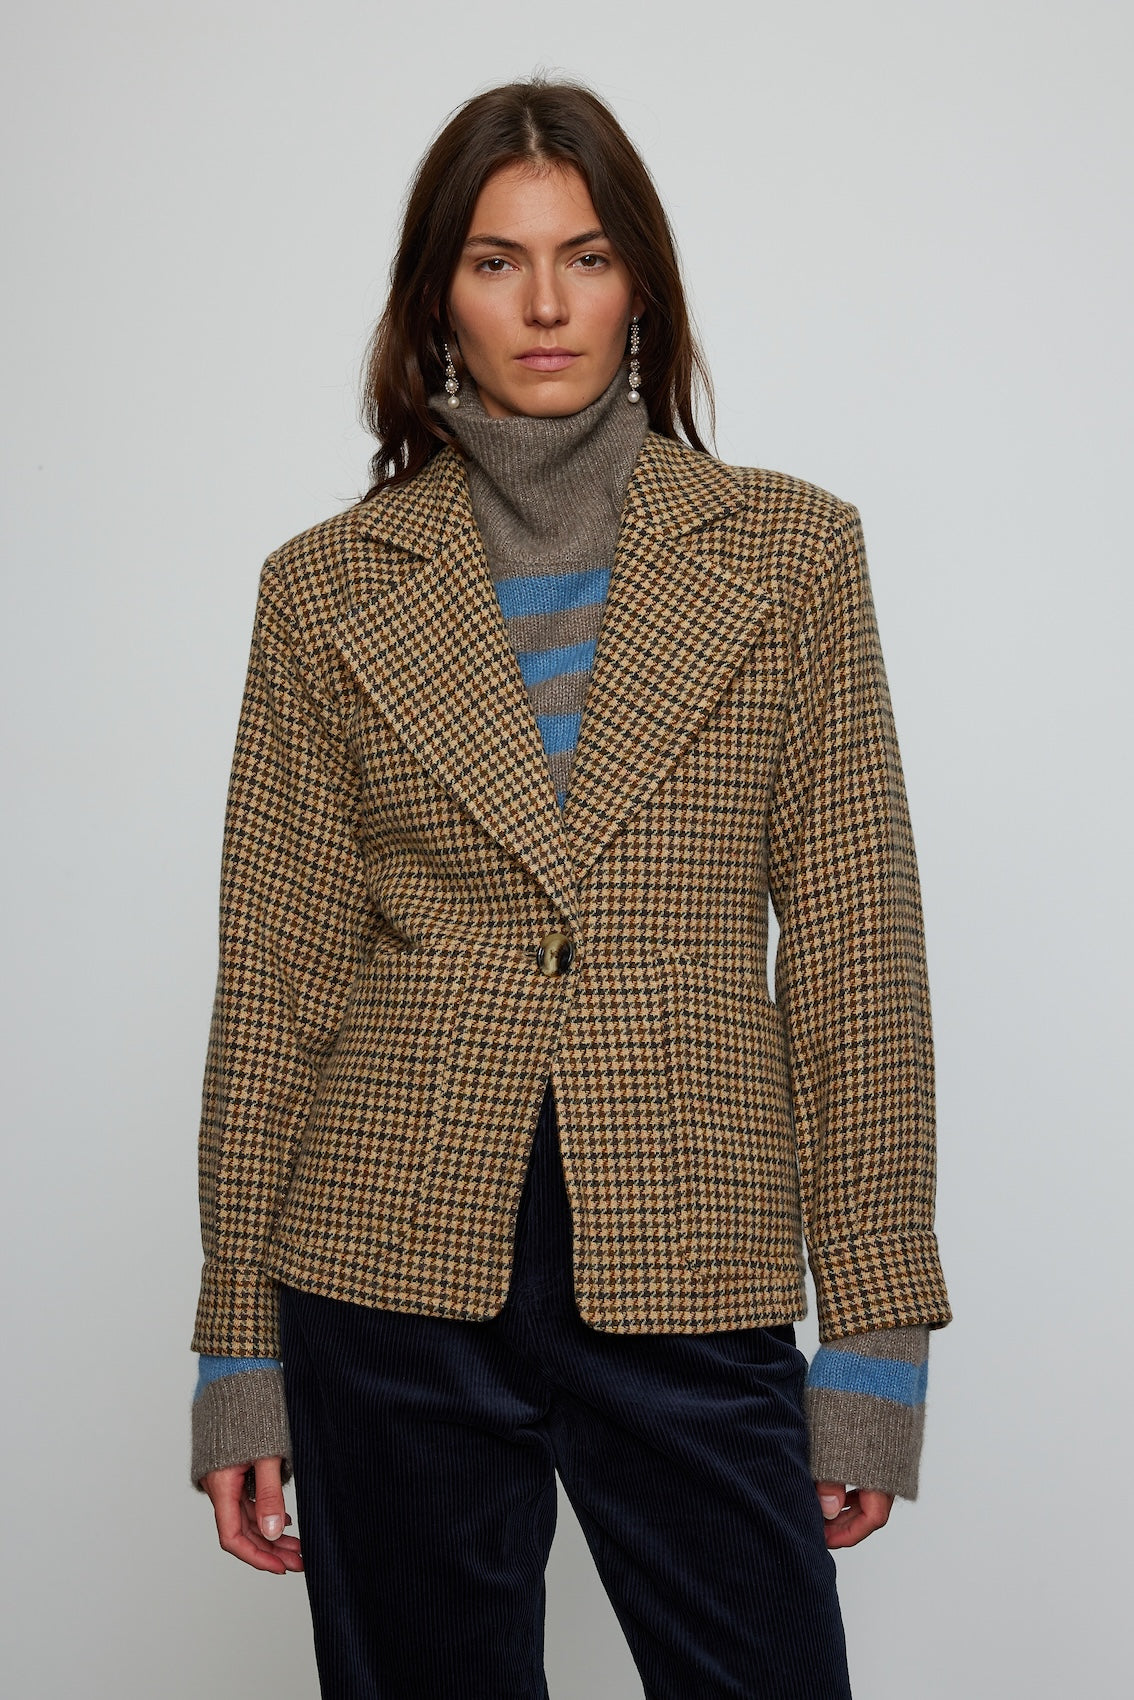 Caro Editions The Annika Jacket in a classic houndstooth tweed The jacket features a single-button closing at the front, wide padded shoulders, and large front pockets. The jacket is slightly fitted around the waist.  Material: 100% wool. Lining: 100% viscose.